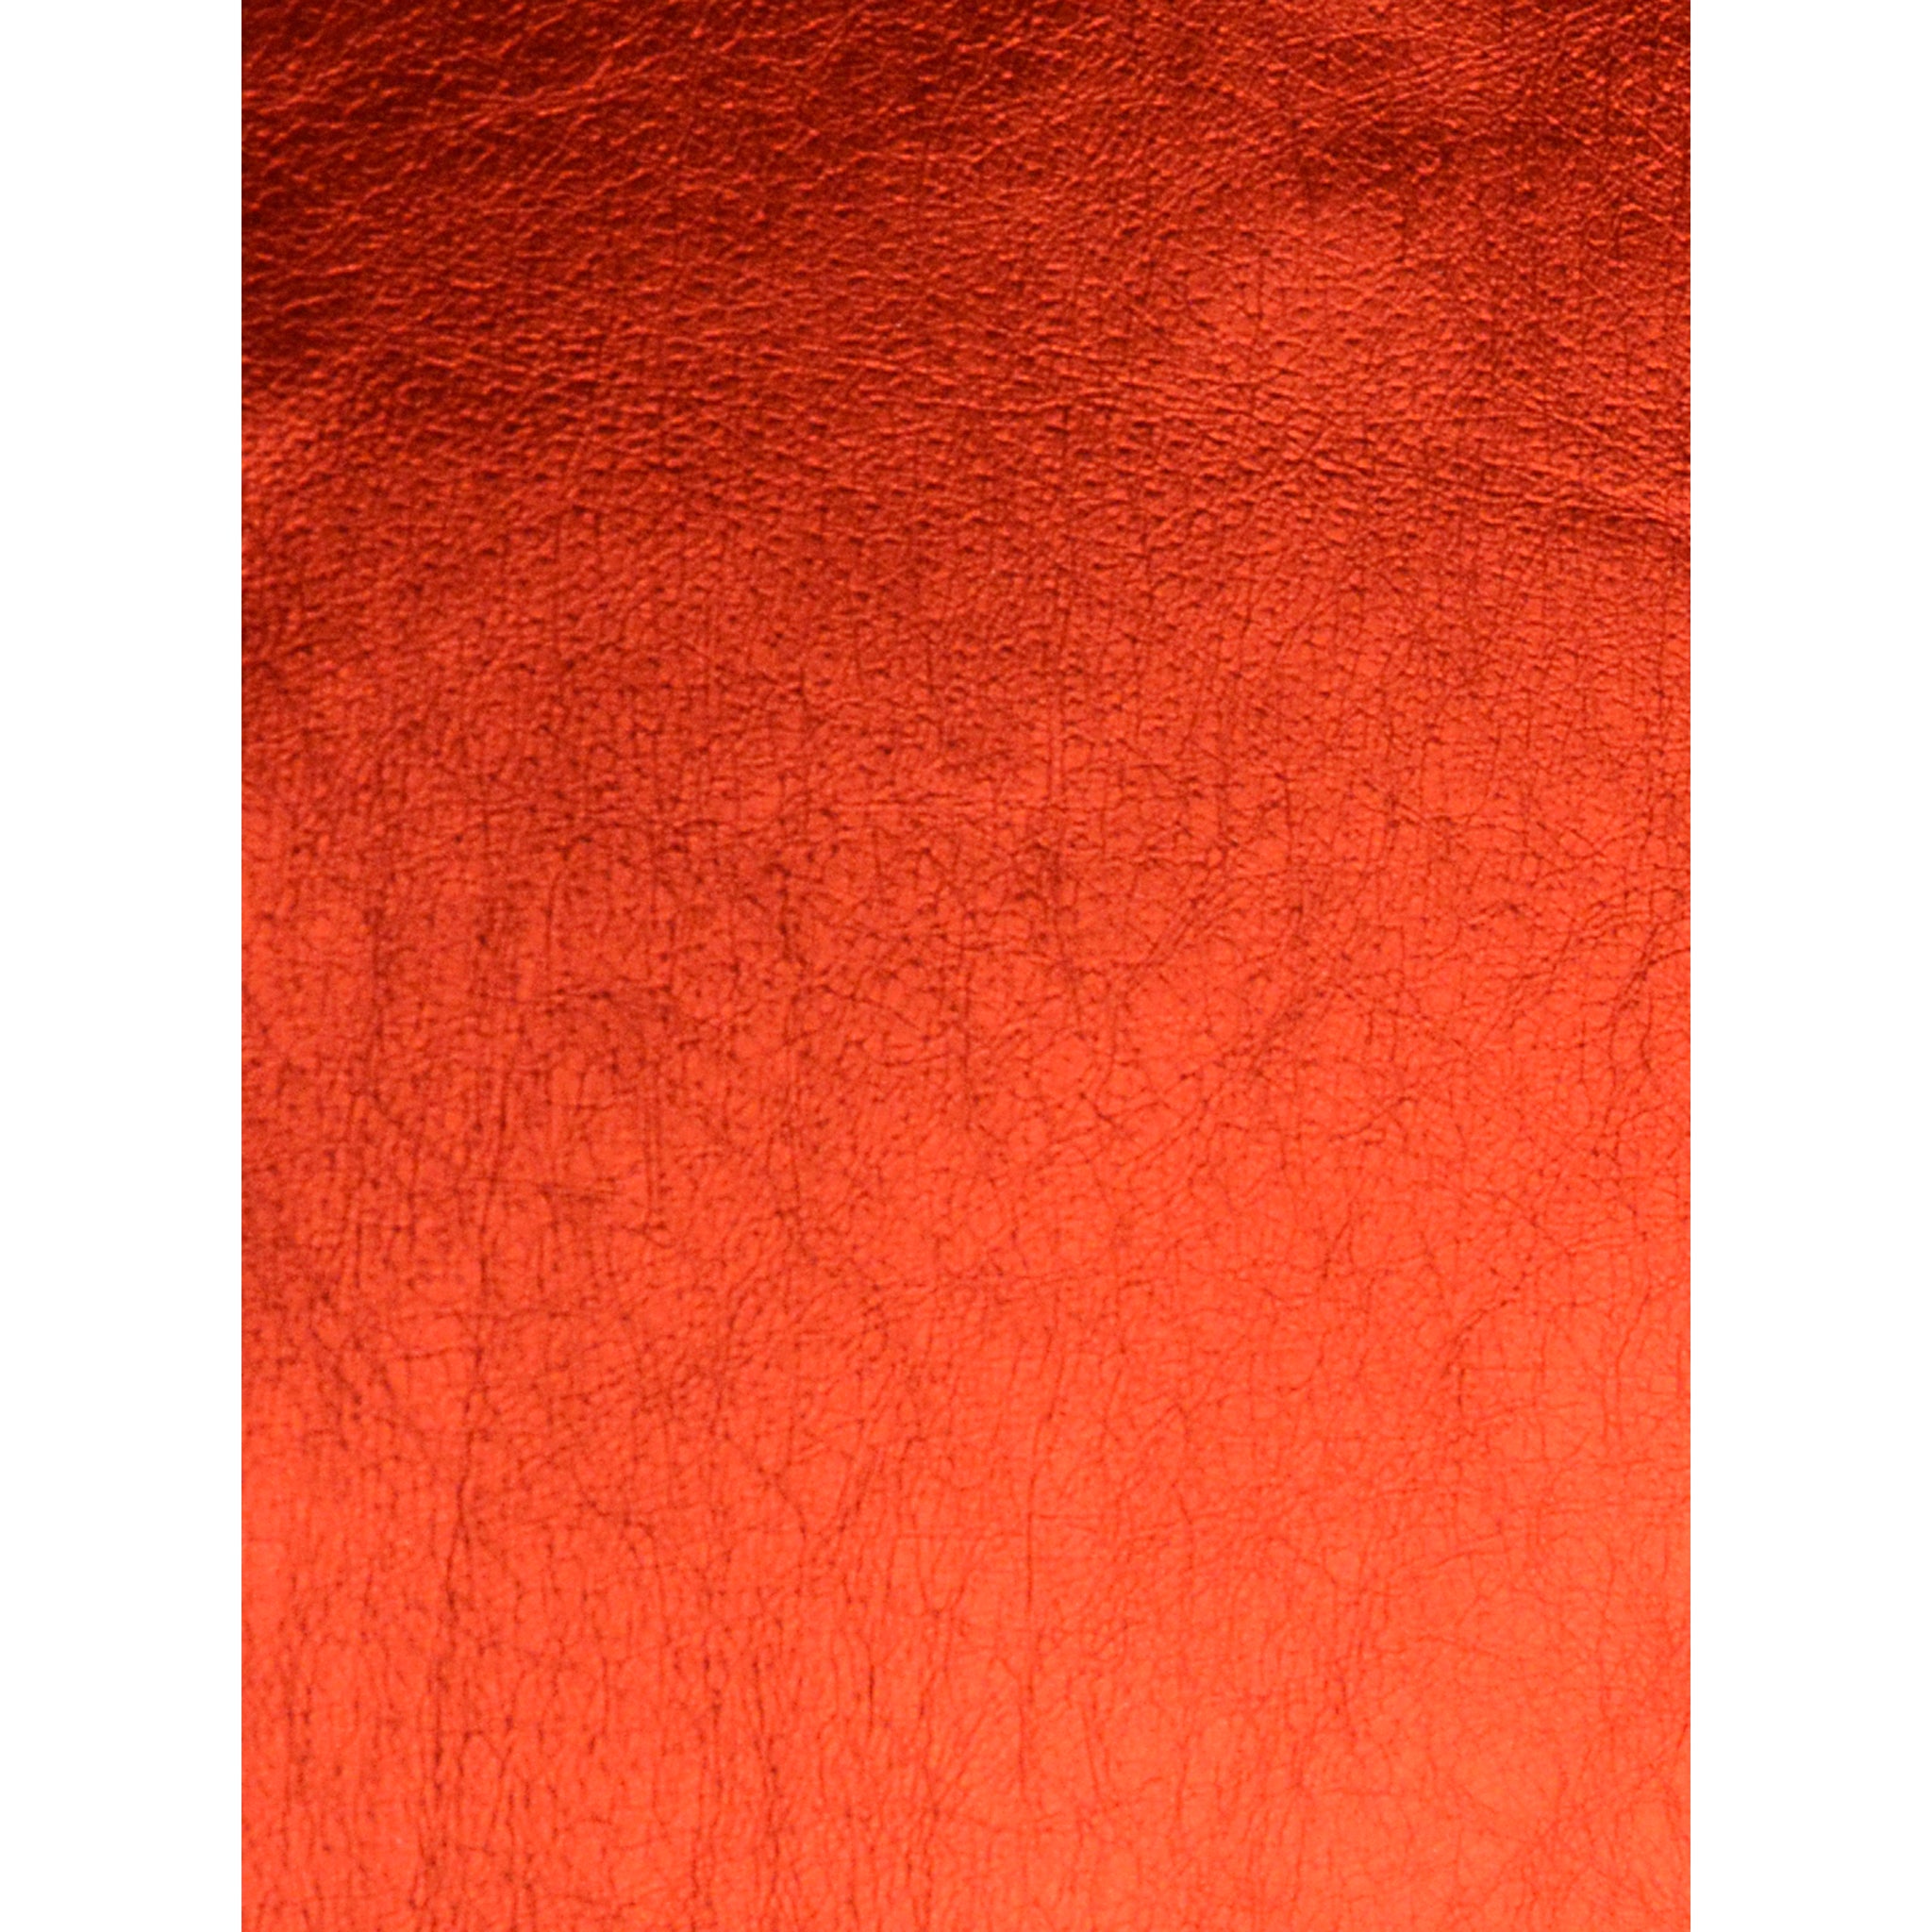 Red Metallic Foil Leather